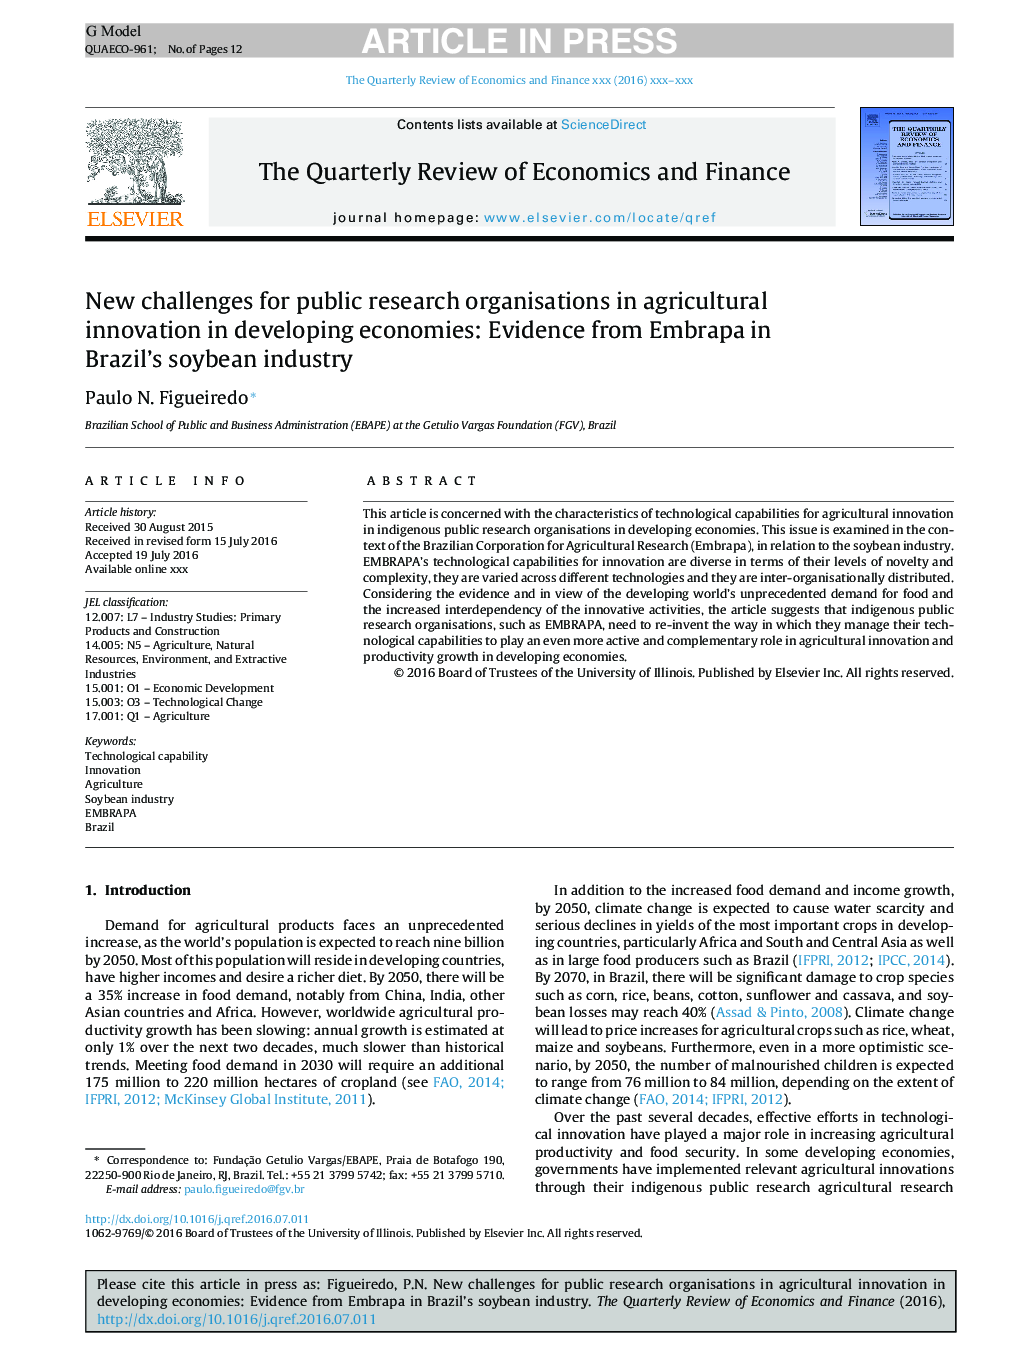 New challenges for public research organisations in agricultural innovation in developing economies: Evidence from Embrapa in Brazil's soybean industry